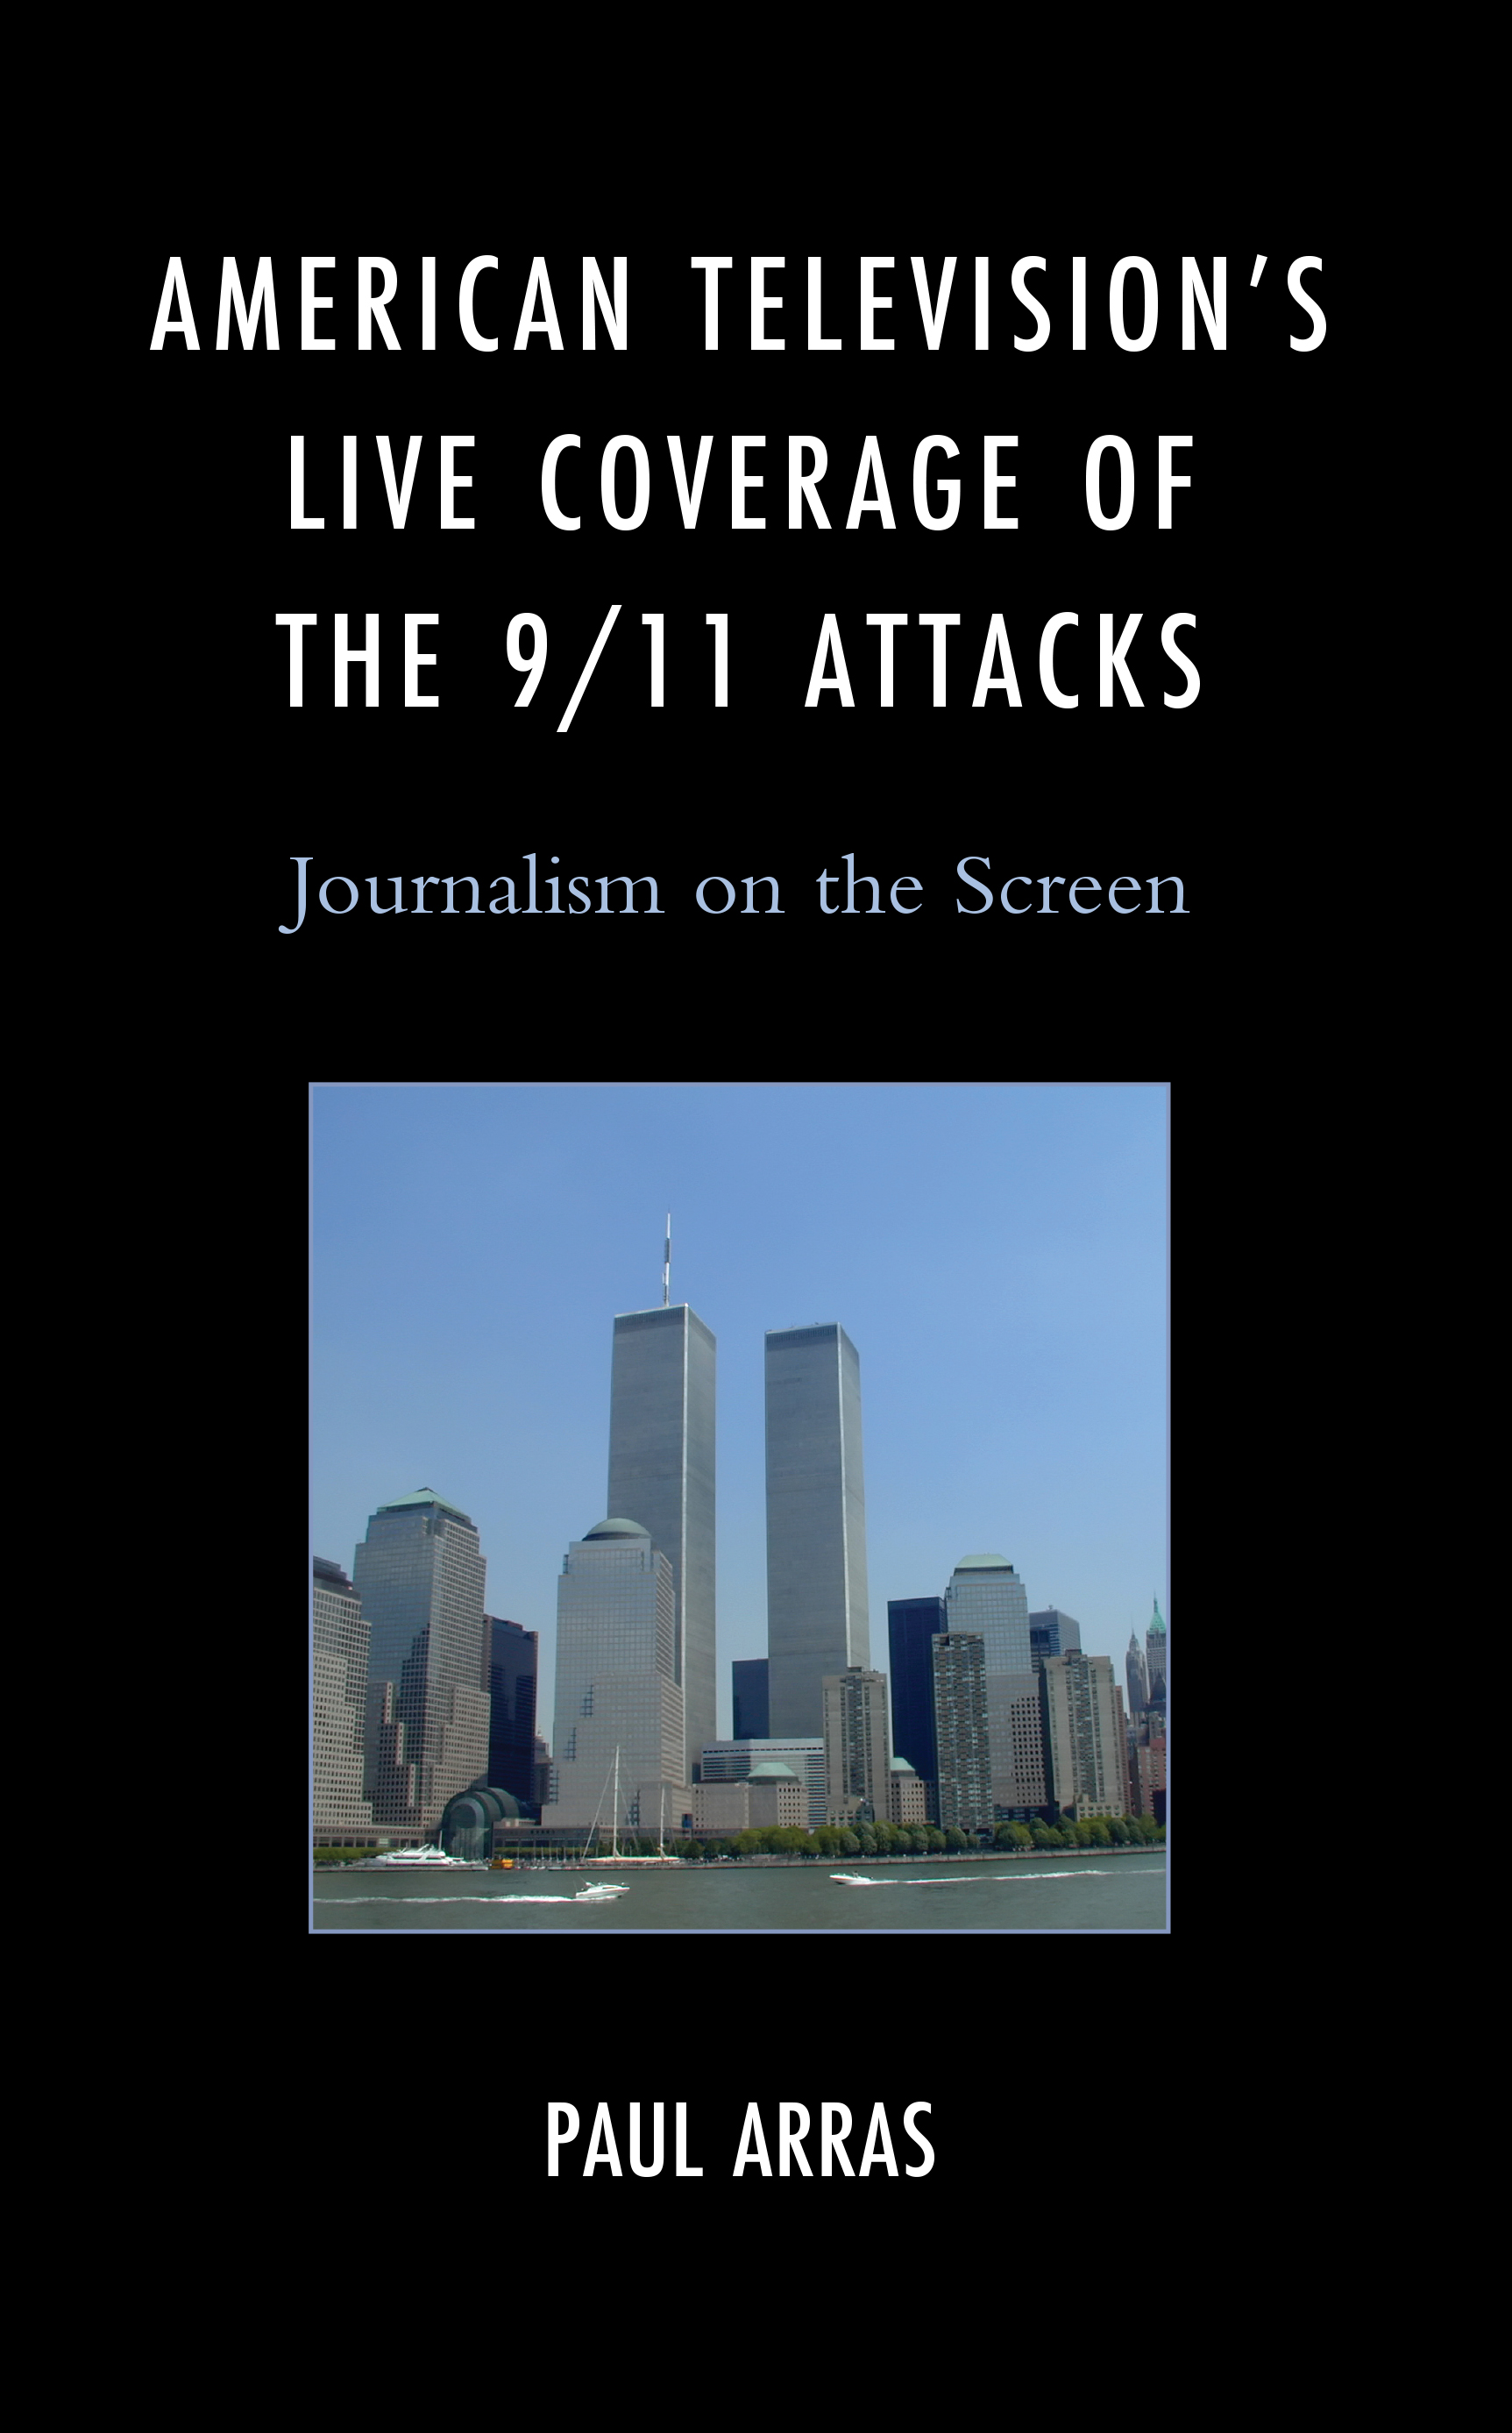 American Television’s Live Coverage of the 9/11 Attacks: Journalism on the Screen